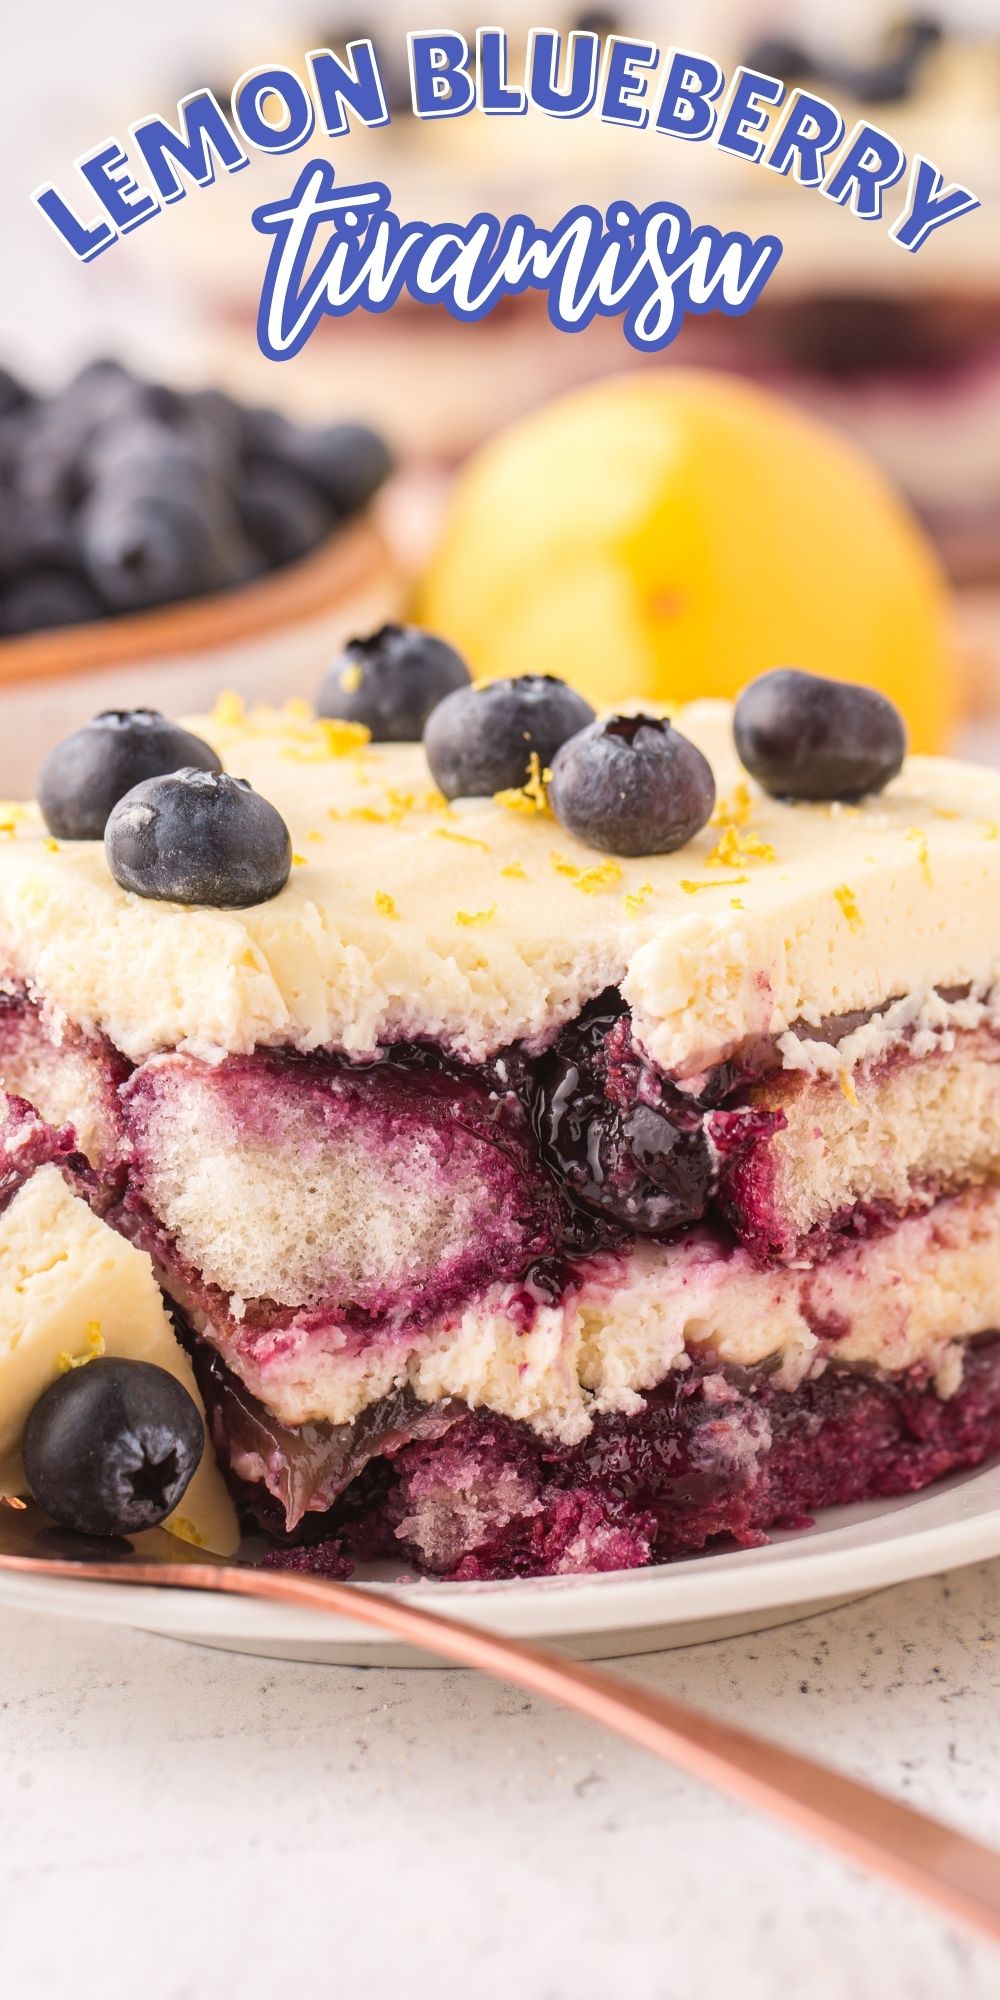 This Lemon Blueberry Tiramisu is just as easy, but deliciously different. It replaces the dark richness of coffee and cocoa with the light, fruity flavors of lemon and blueberry.  via @familyfresh